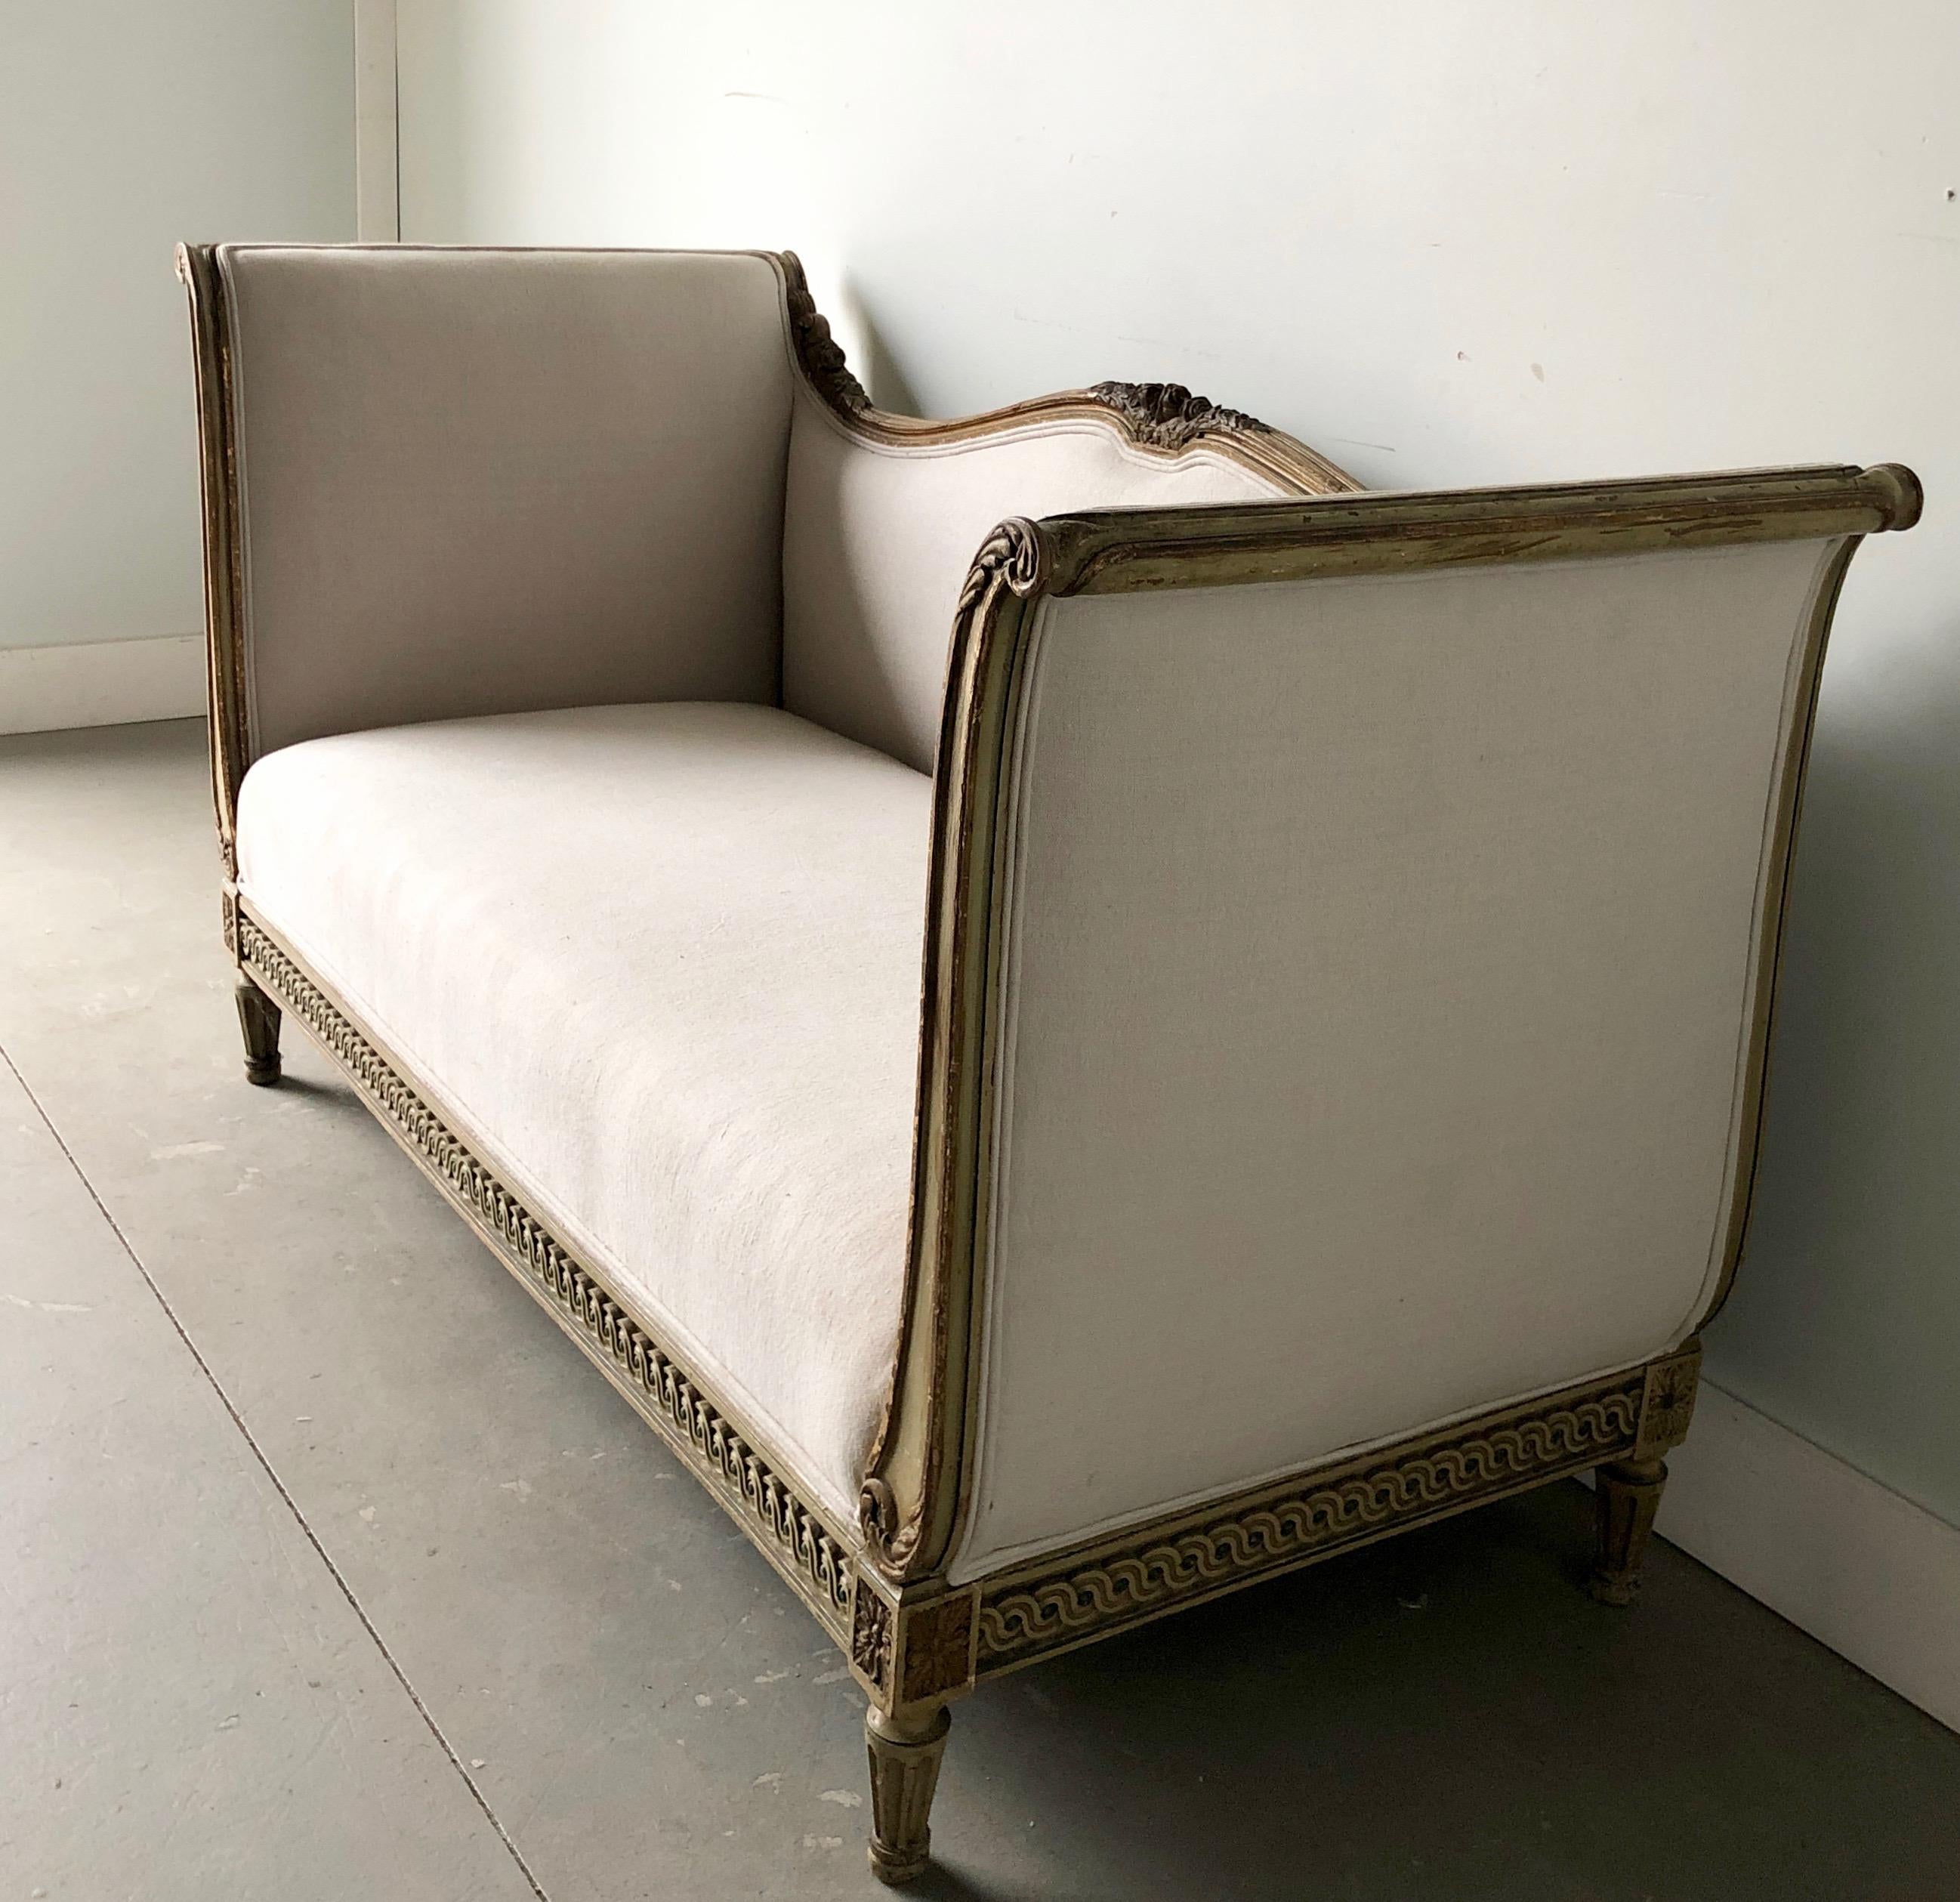 19th century Louis XVI style exceptional carved and painted sofa with conical fluted legs. Upholstered in a beautifully in cream/off-white linen.
  